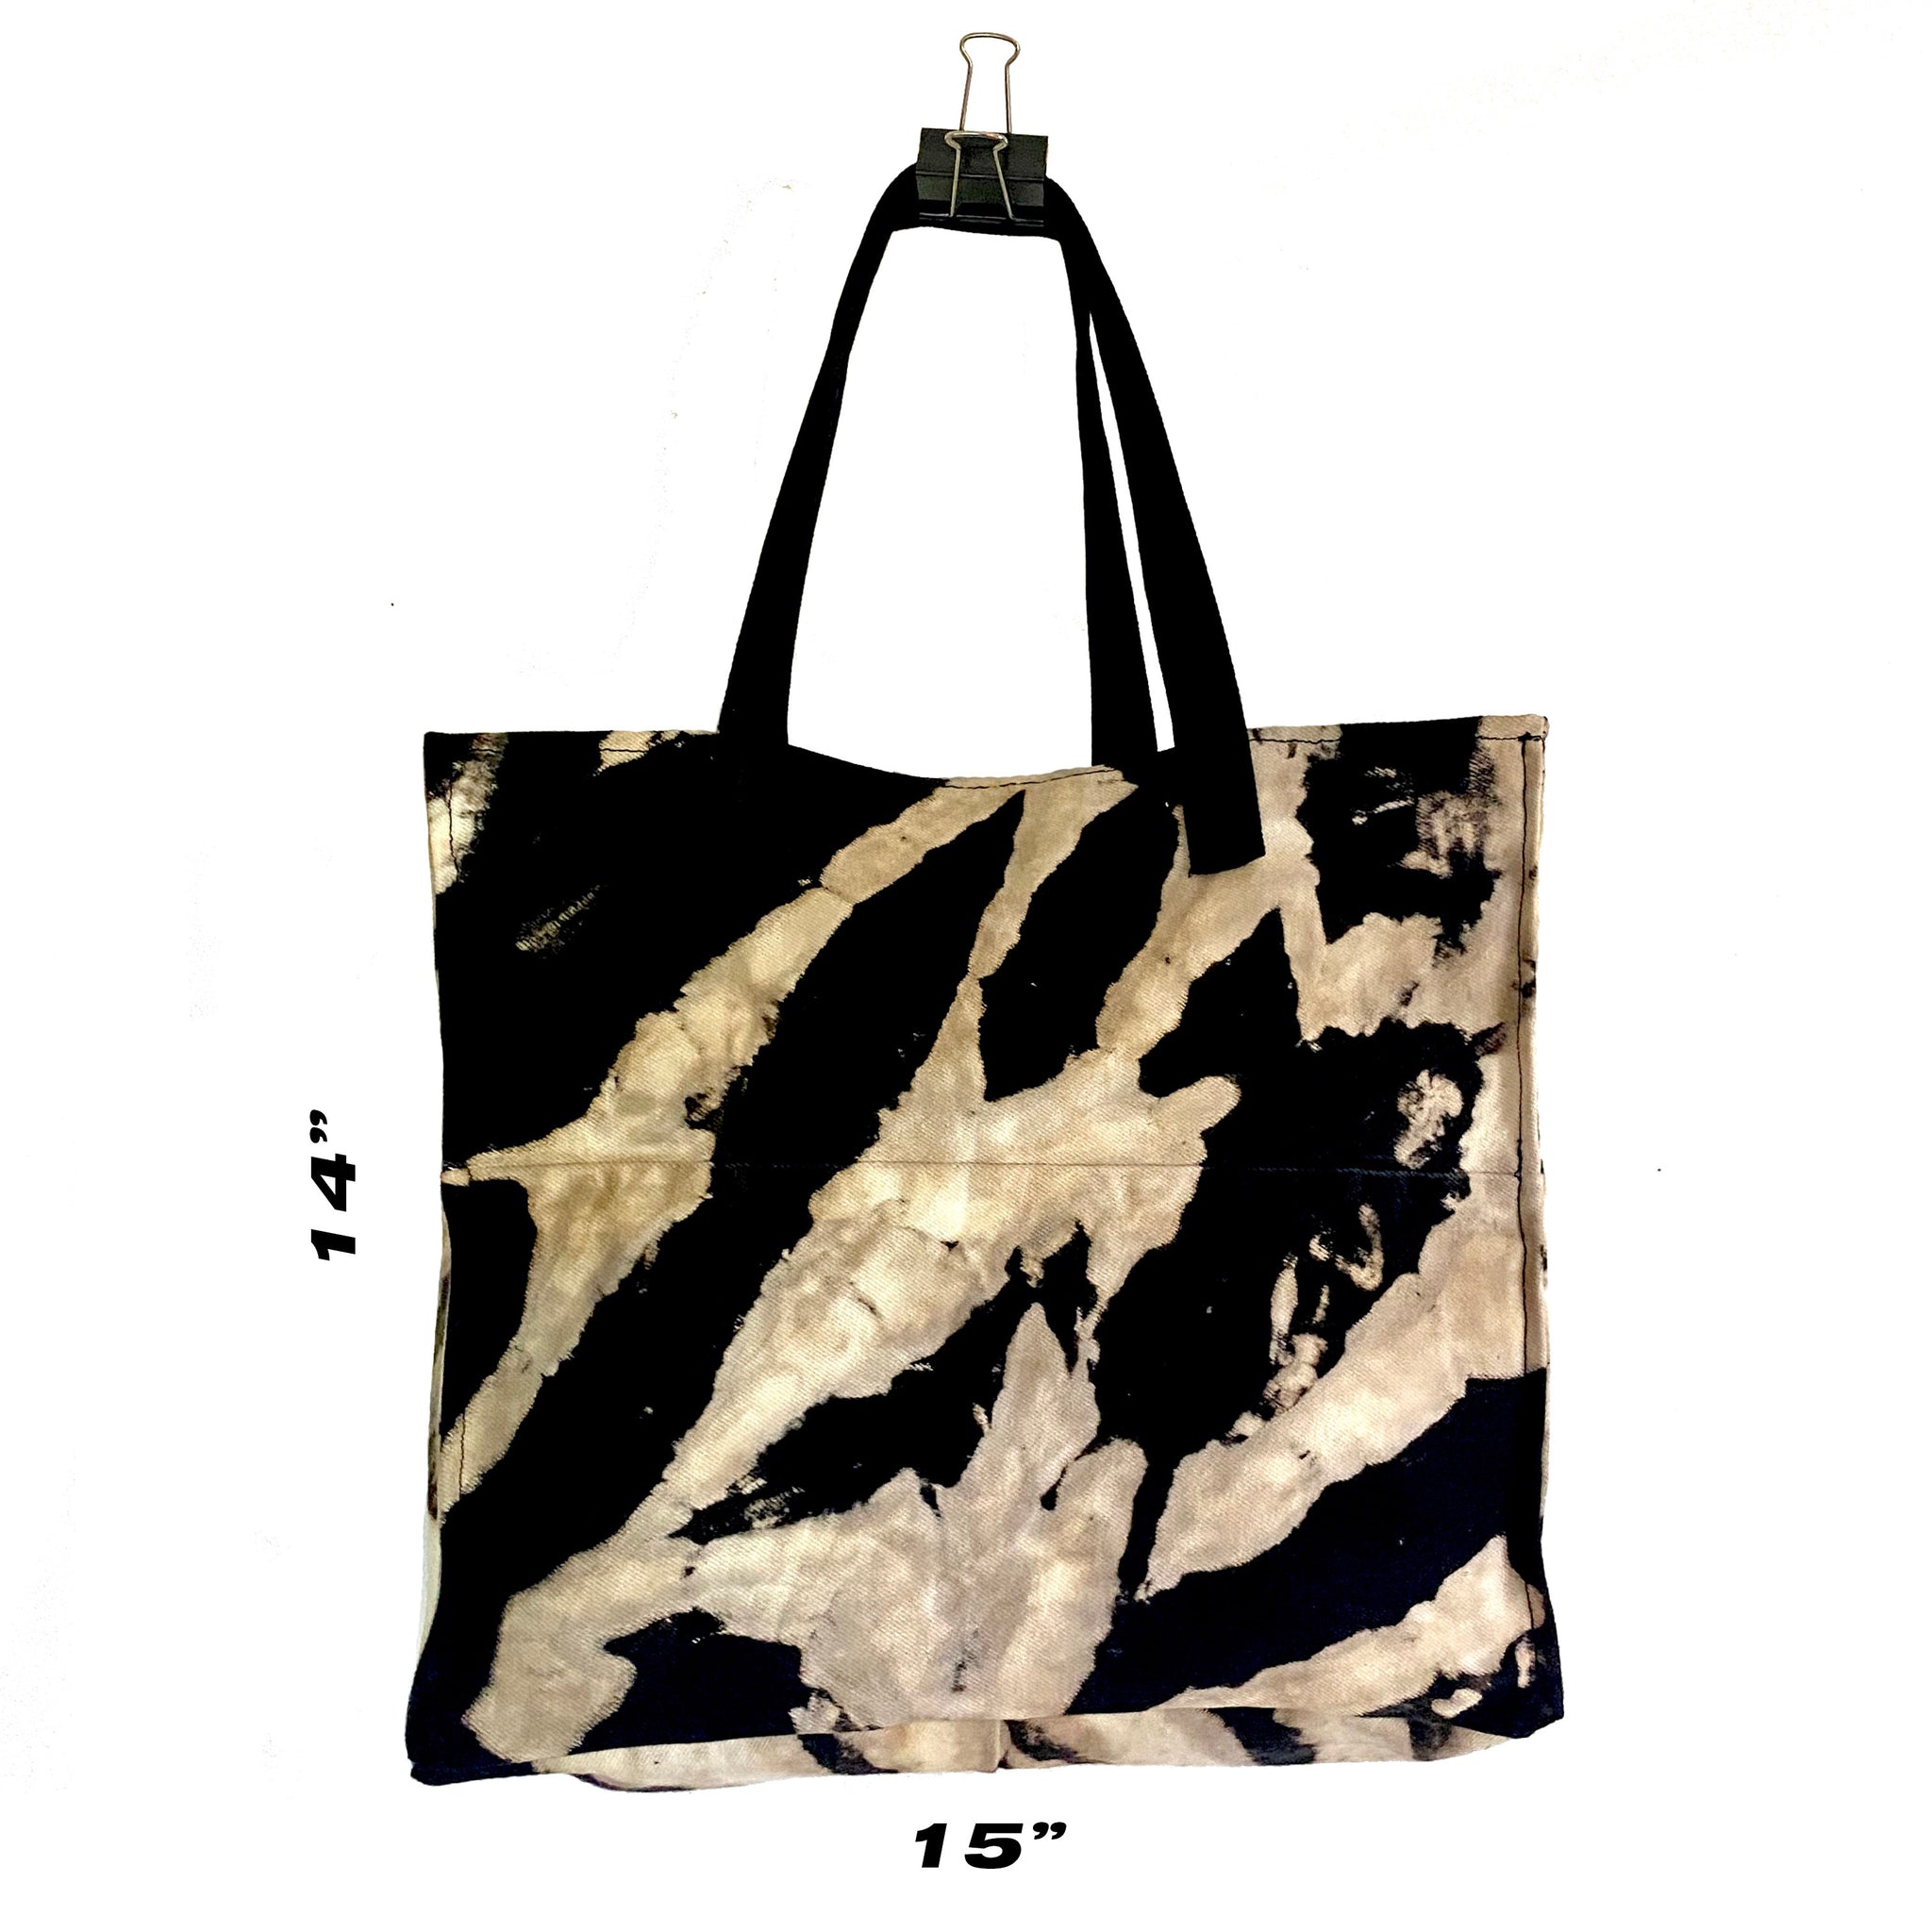 INPERFECT_TOTE_001